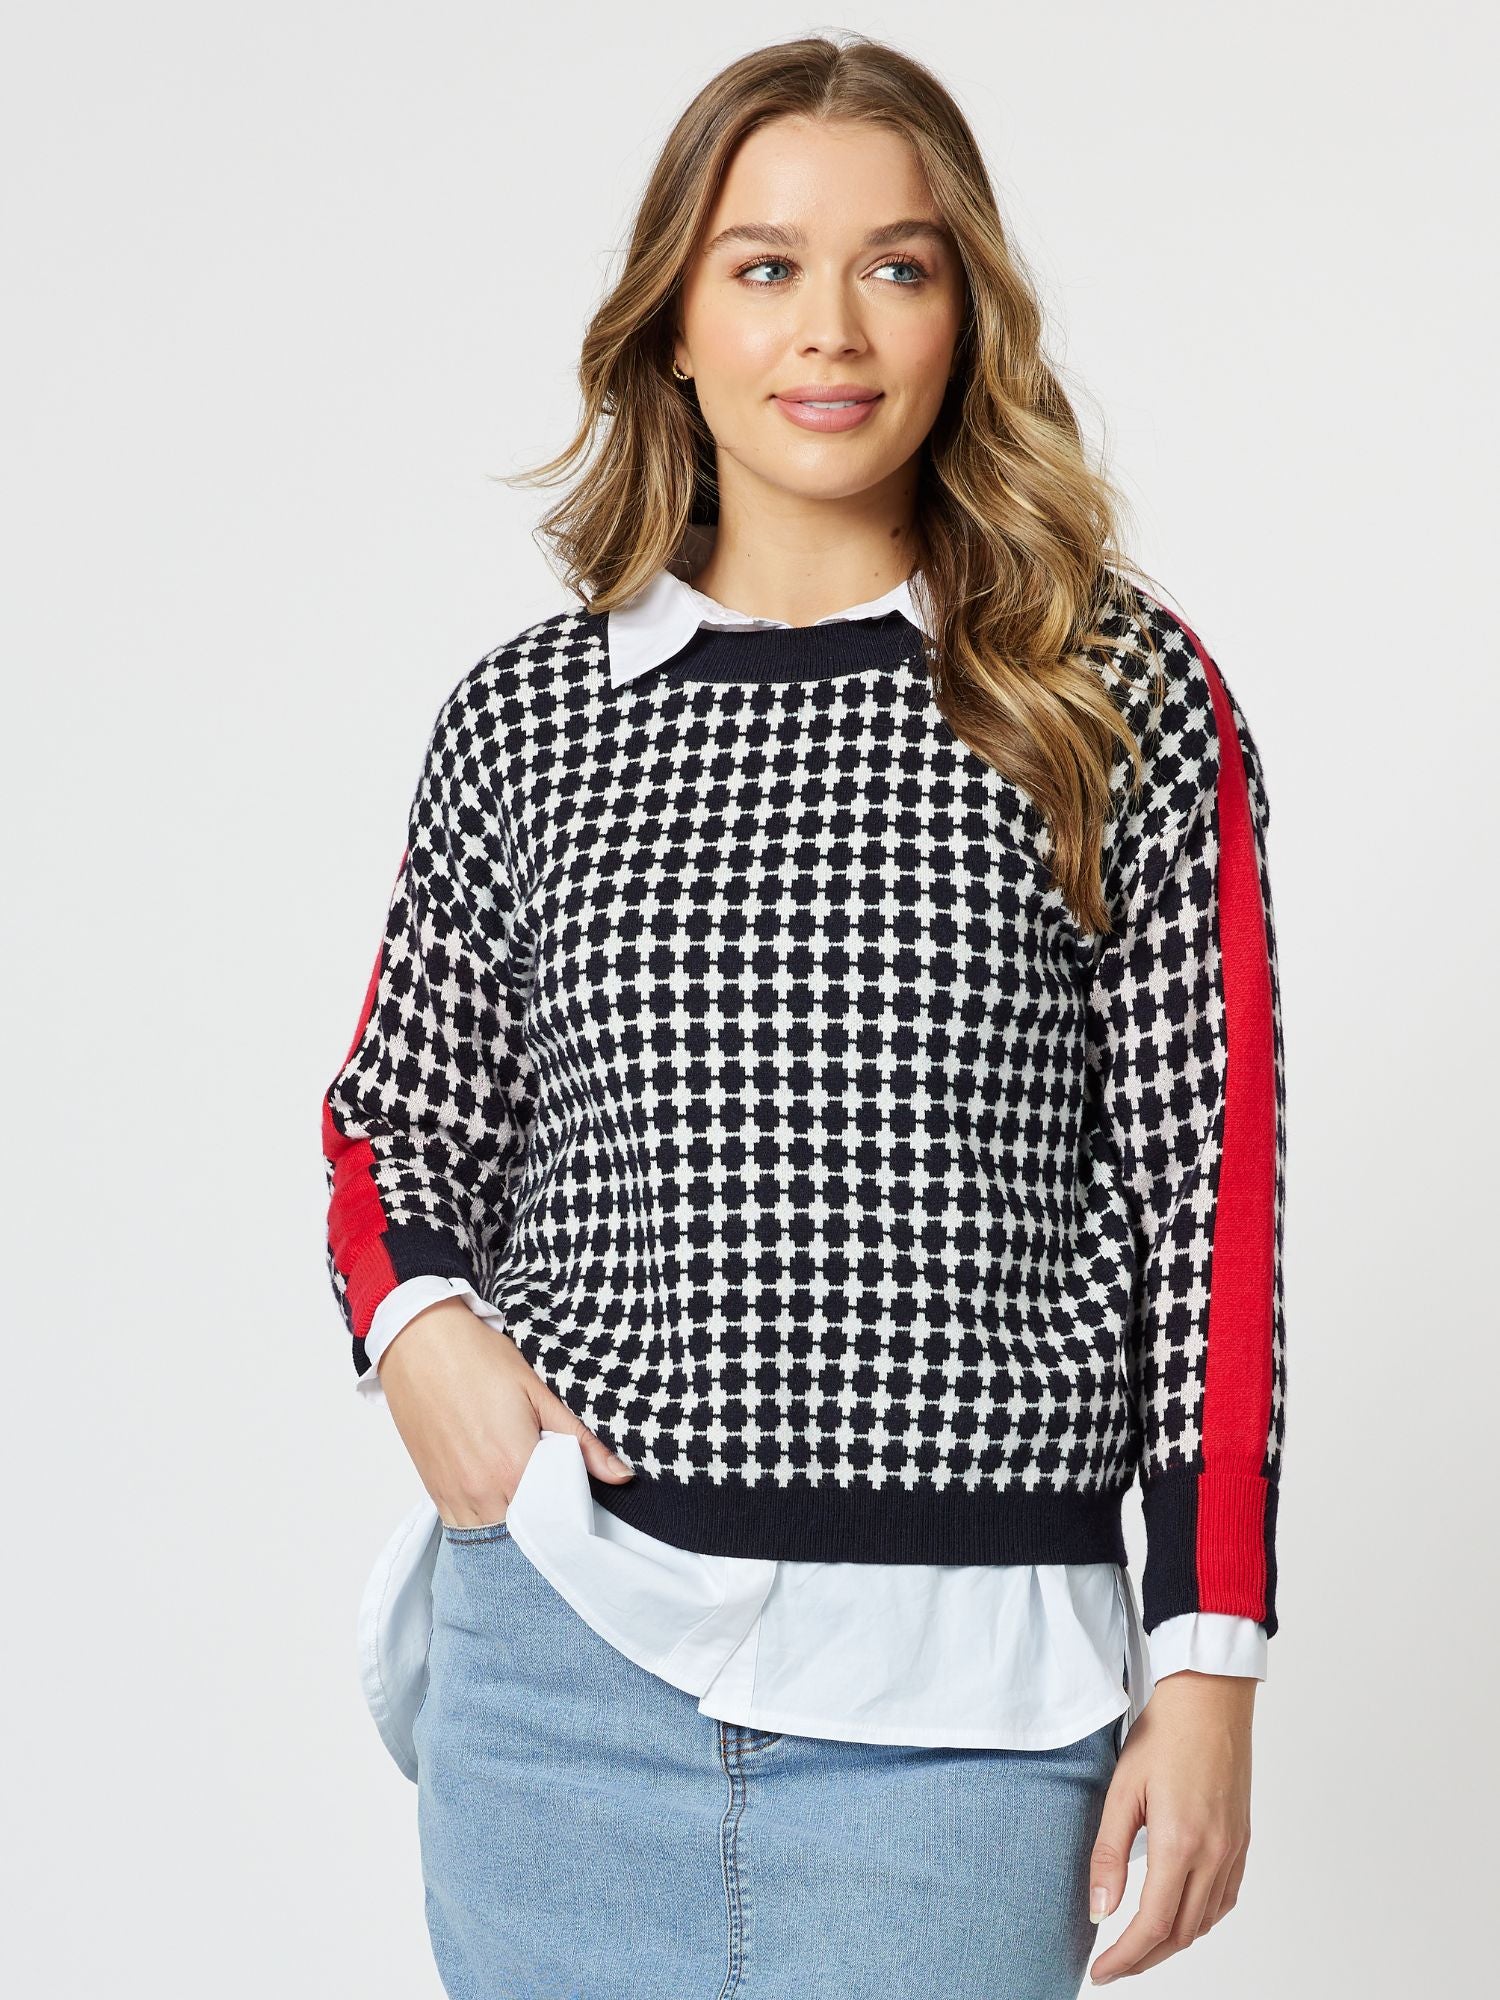 Hope Contrast Knit Top - Black/Red